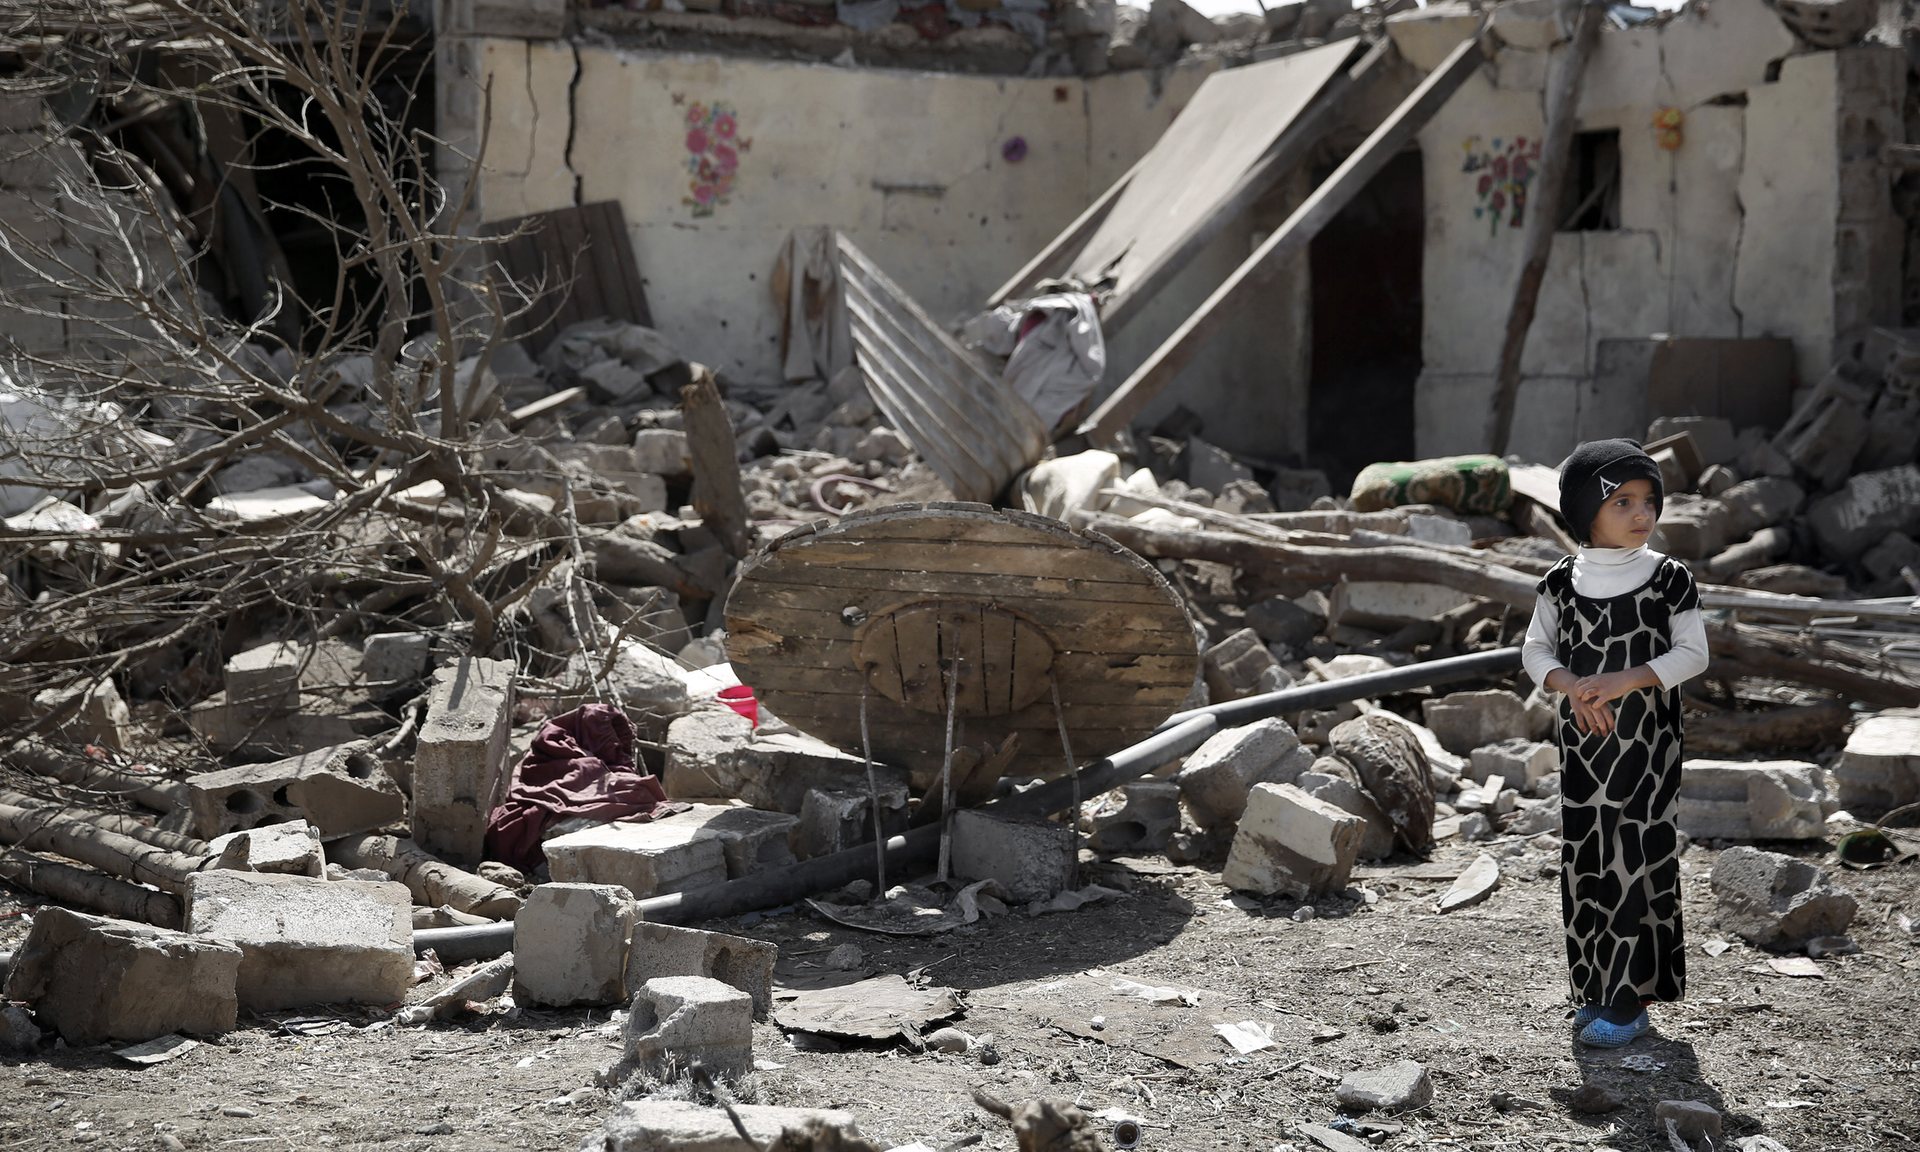  The remains of a house destroyed by a Saudi-led airstrike in Yemen’s capital on Thursday. Photograph: Hani Mohammed/AP